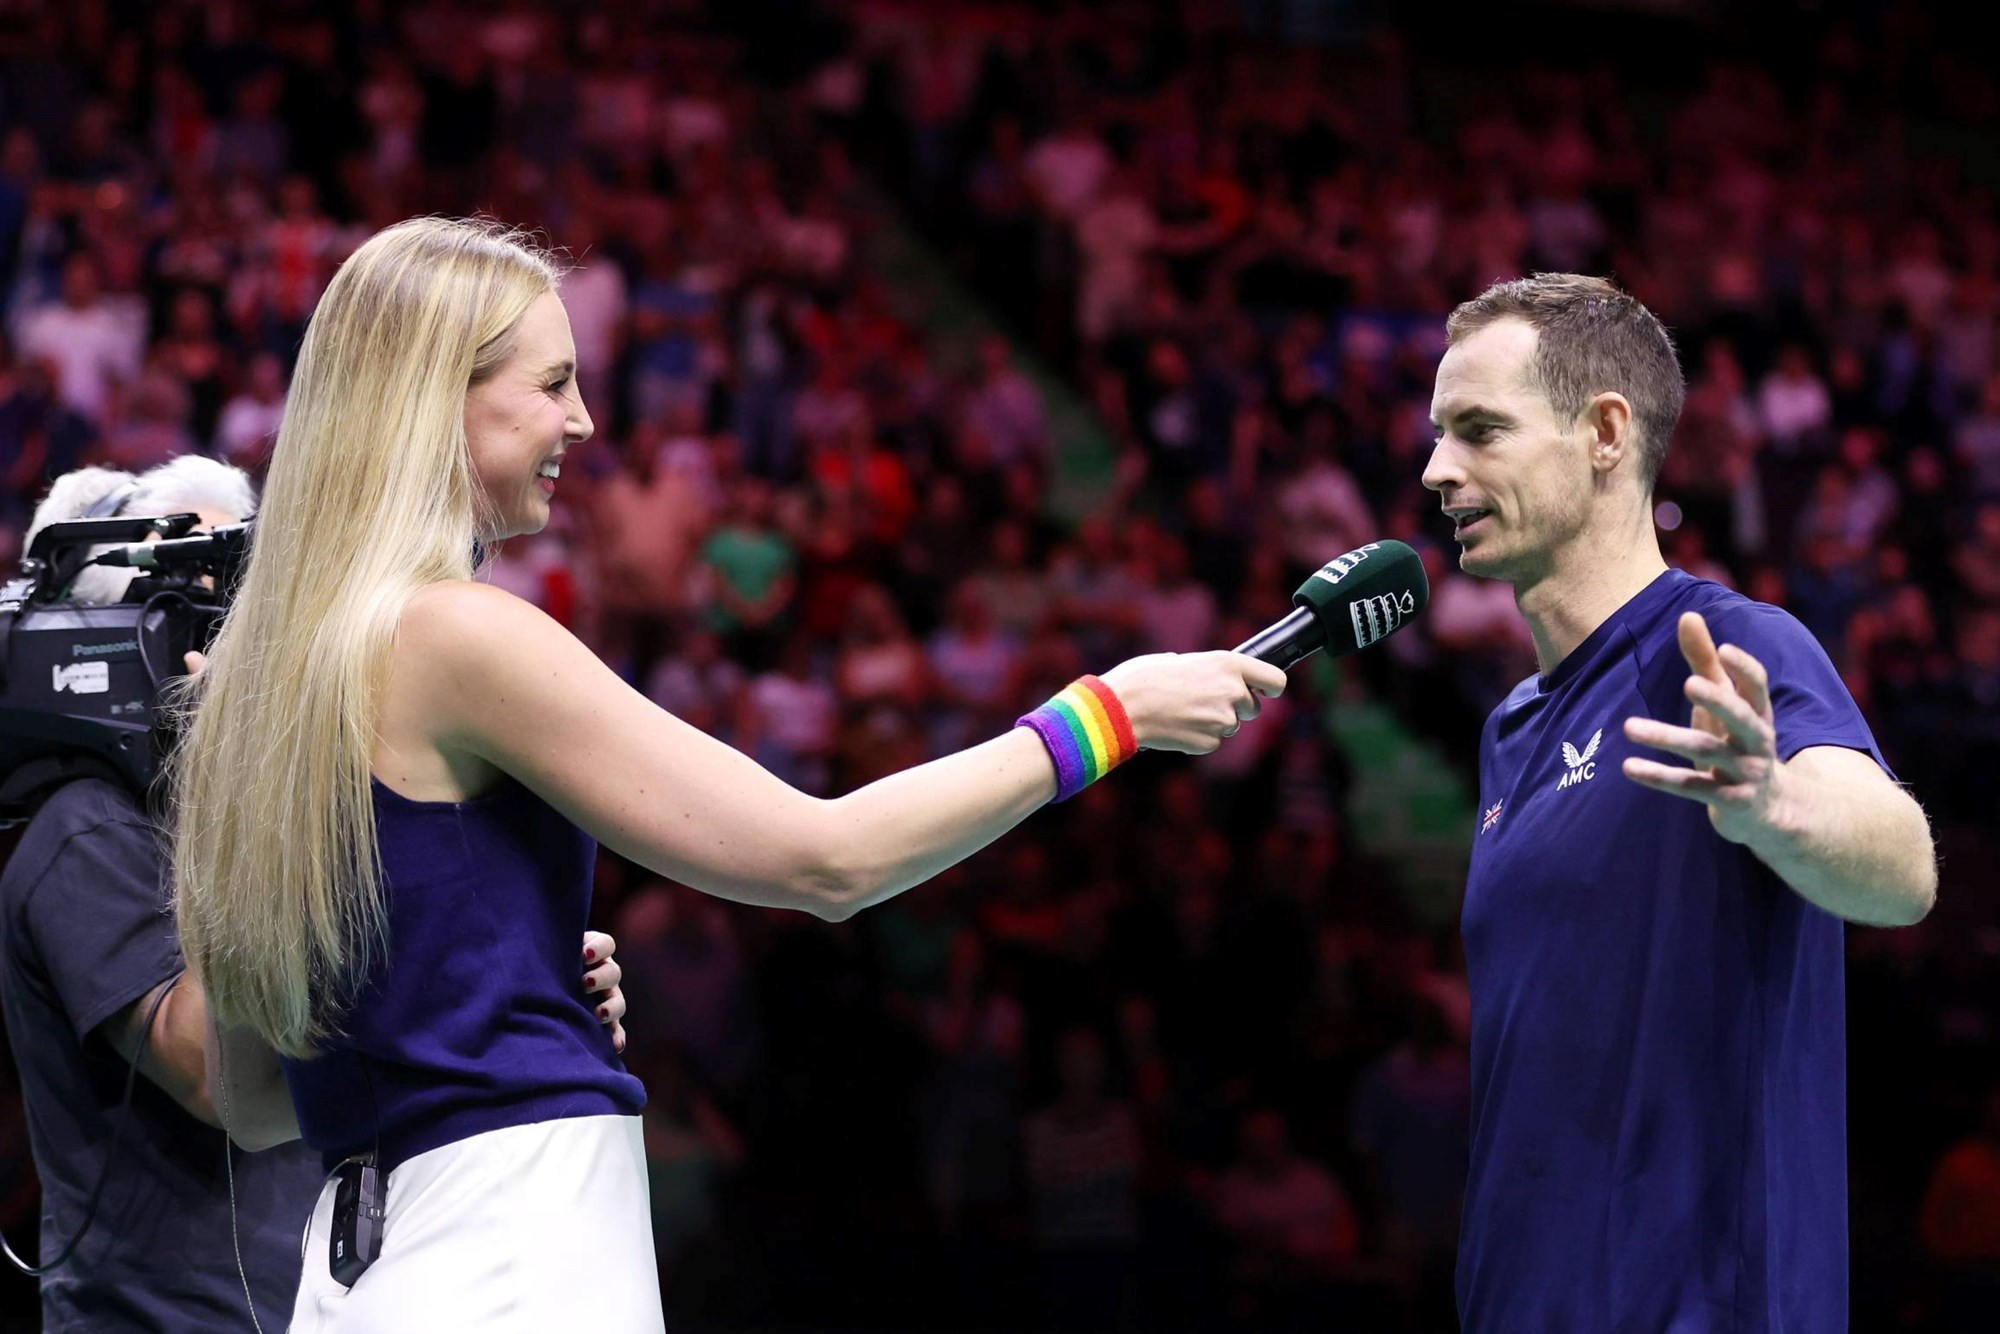 Naomi Broady interviews Andy Murray on court after his Davis Cup match against Switzerland